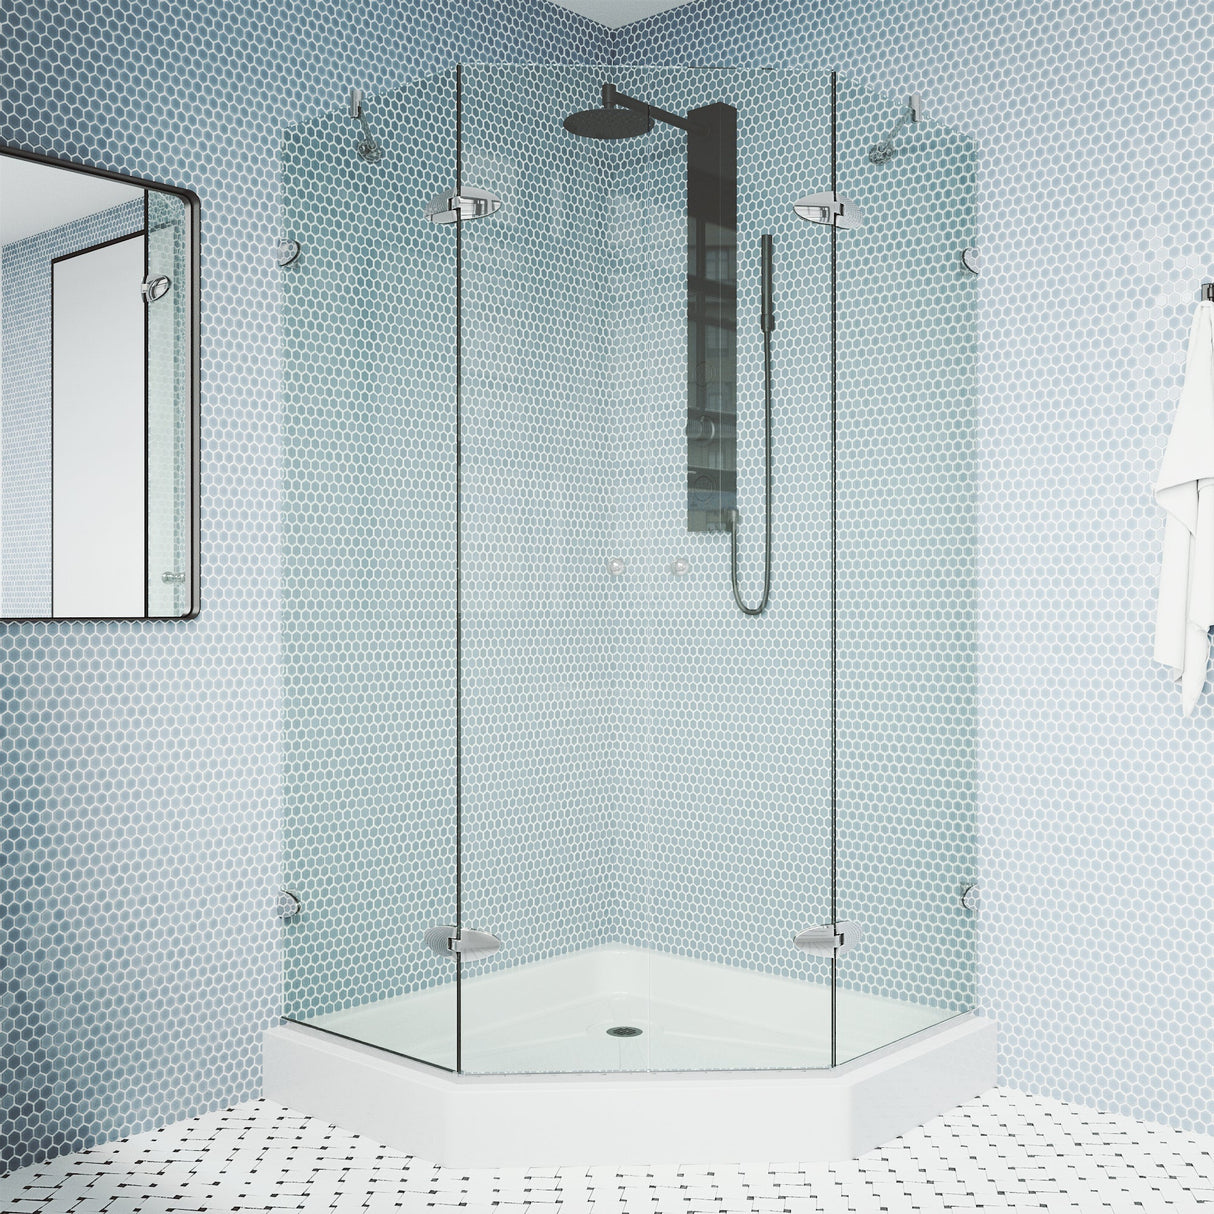 VIGO Gemini 47.675 W x 70.375 H Frameless Hinged Shower Enclosure in Chrome with shower base and handle VG6063CHCL47W